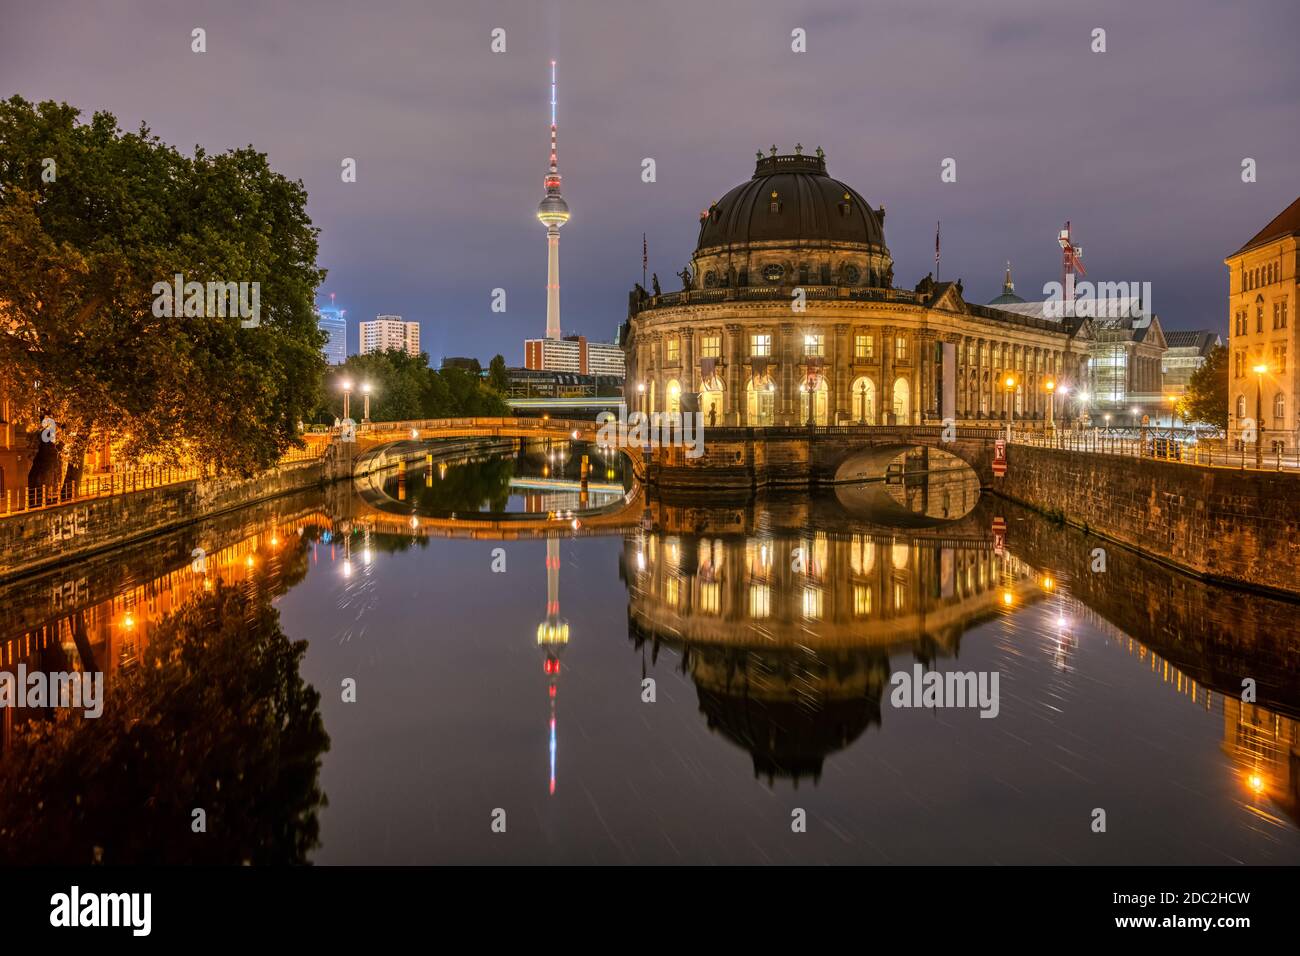 The Bode Museum and the Television Tower in Berlin at night Stock Photo